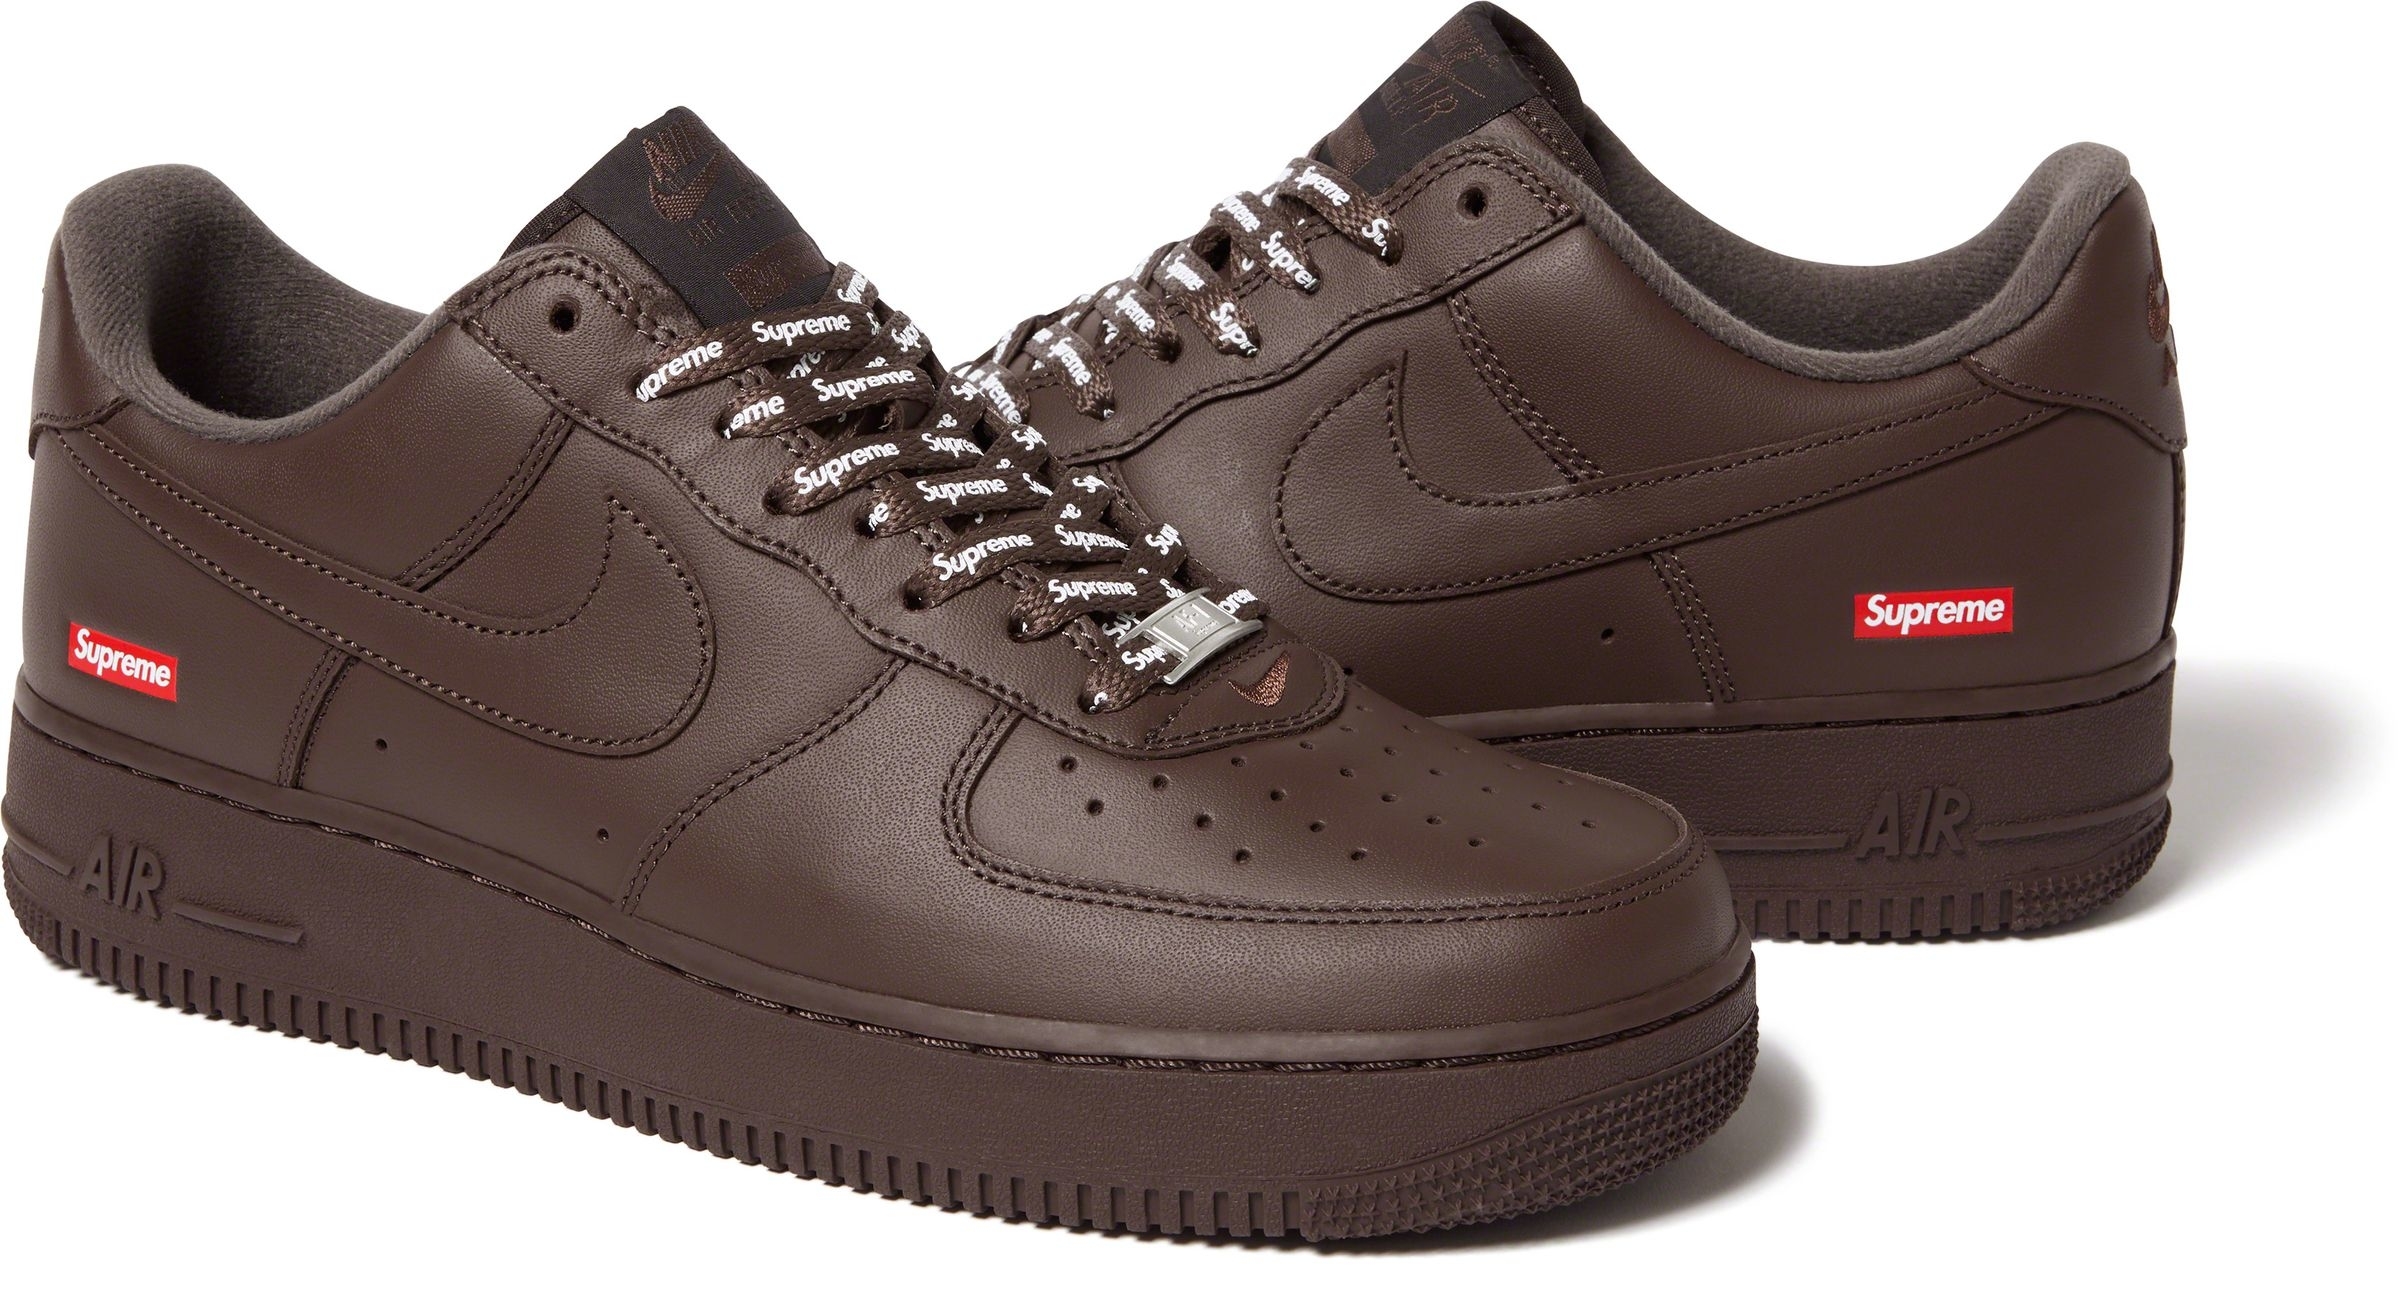 Supreme x Nike Air Force 1 Low 'Baroque Brown' Release Date | Complex